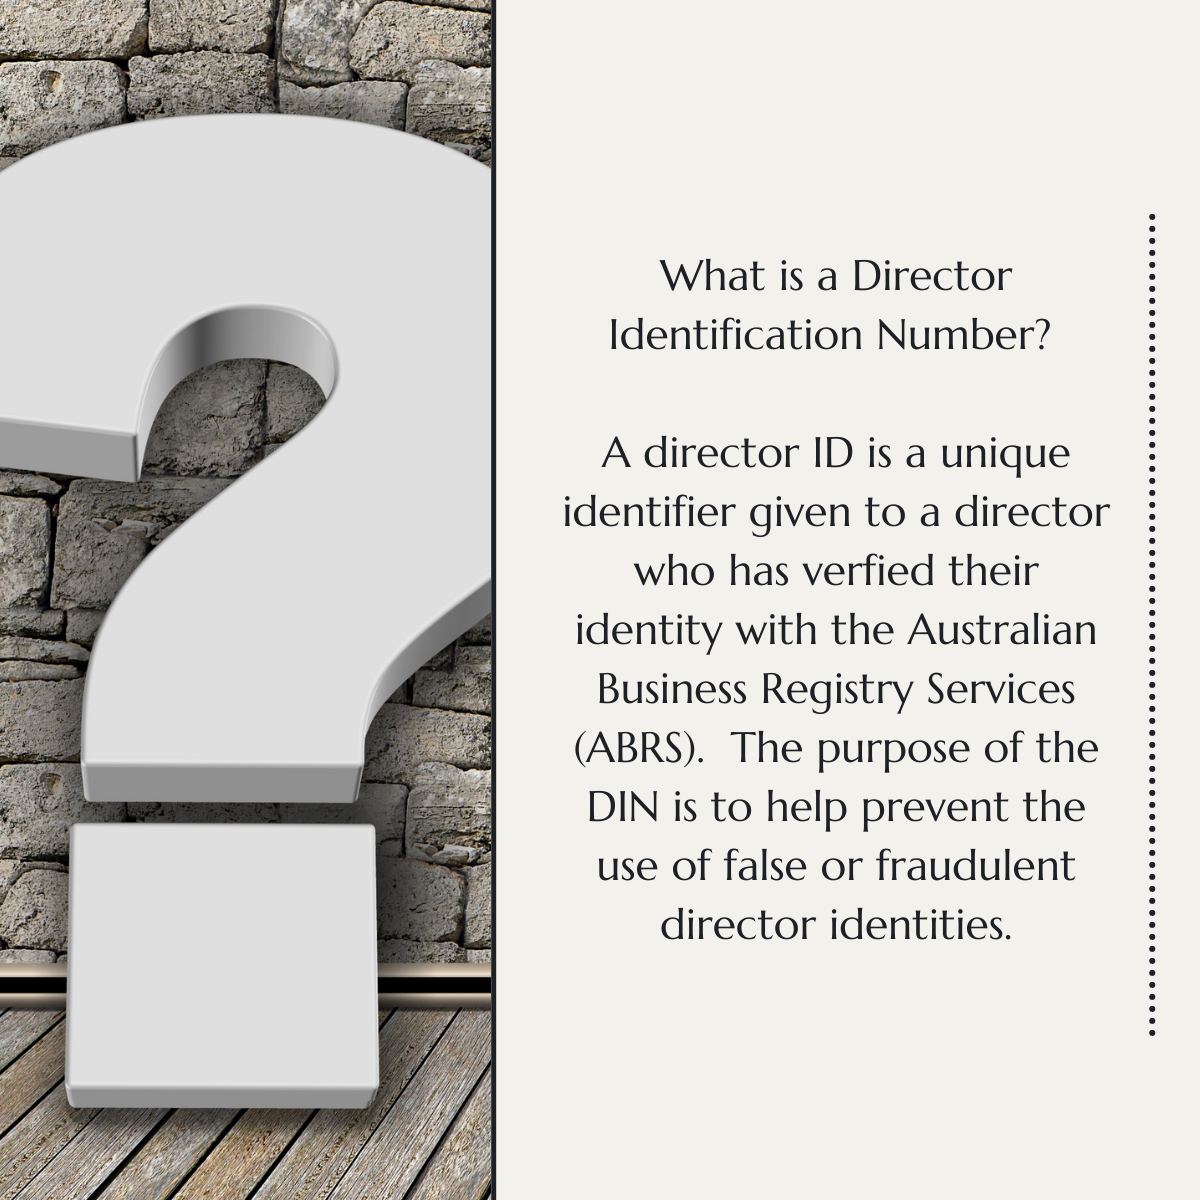 What is a Director Identification Number?